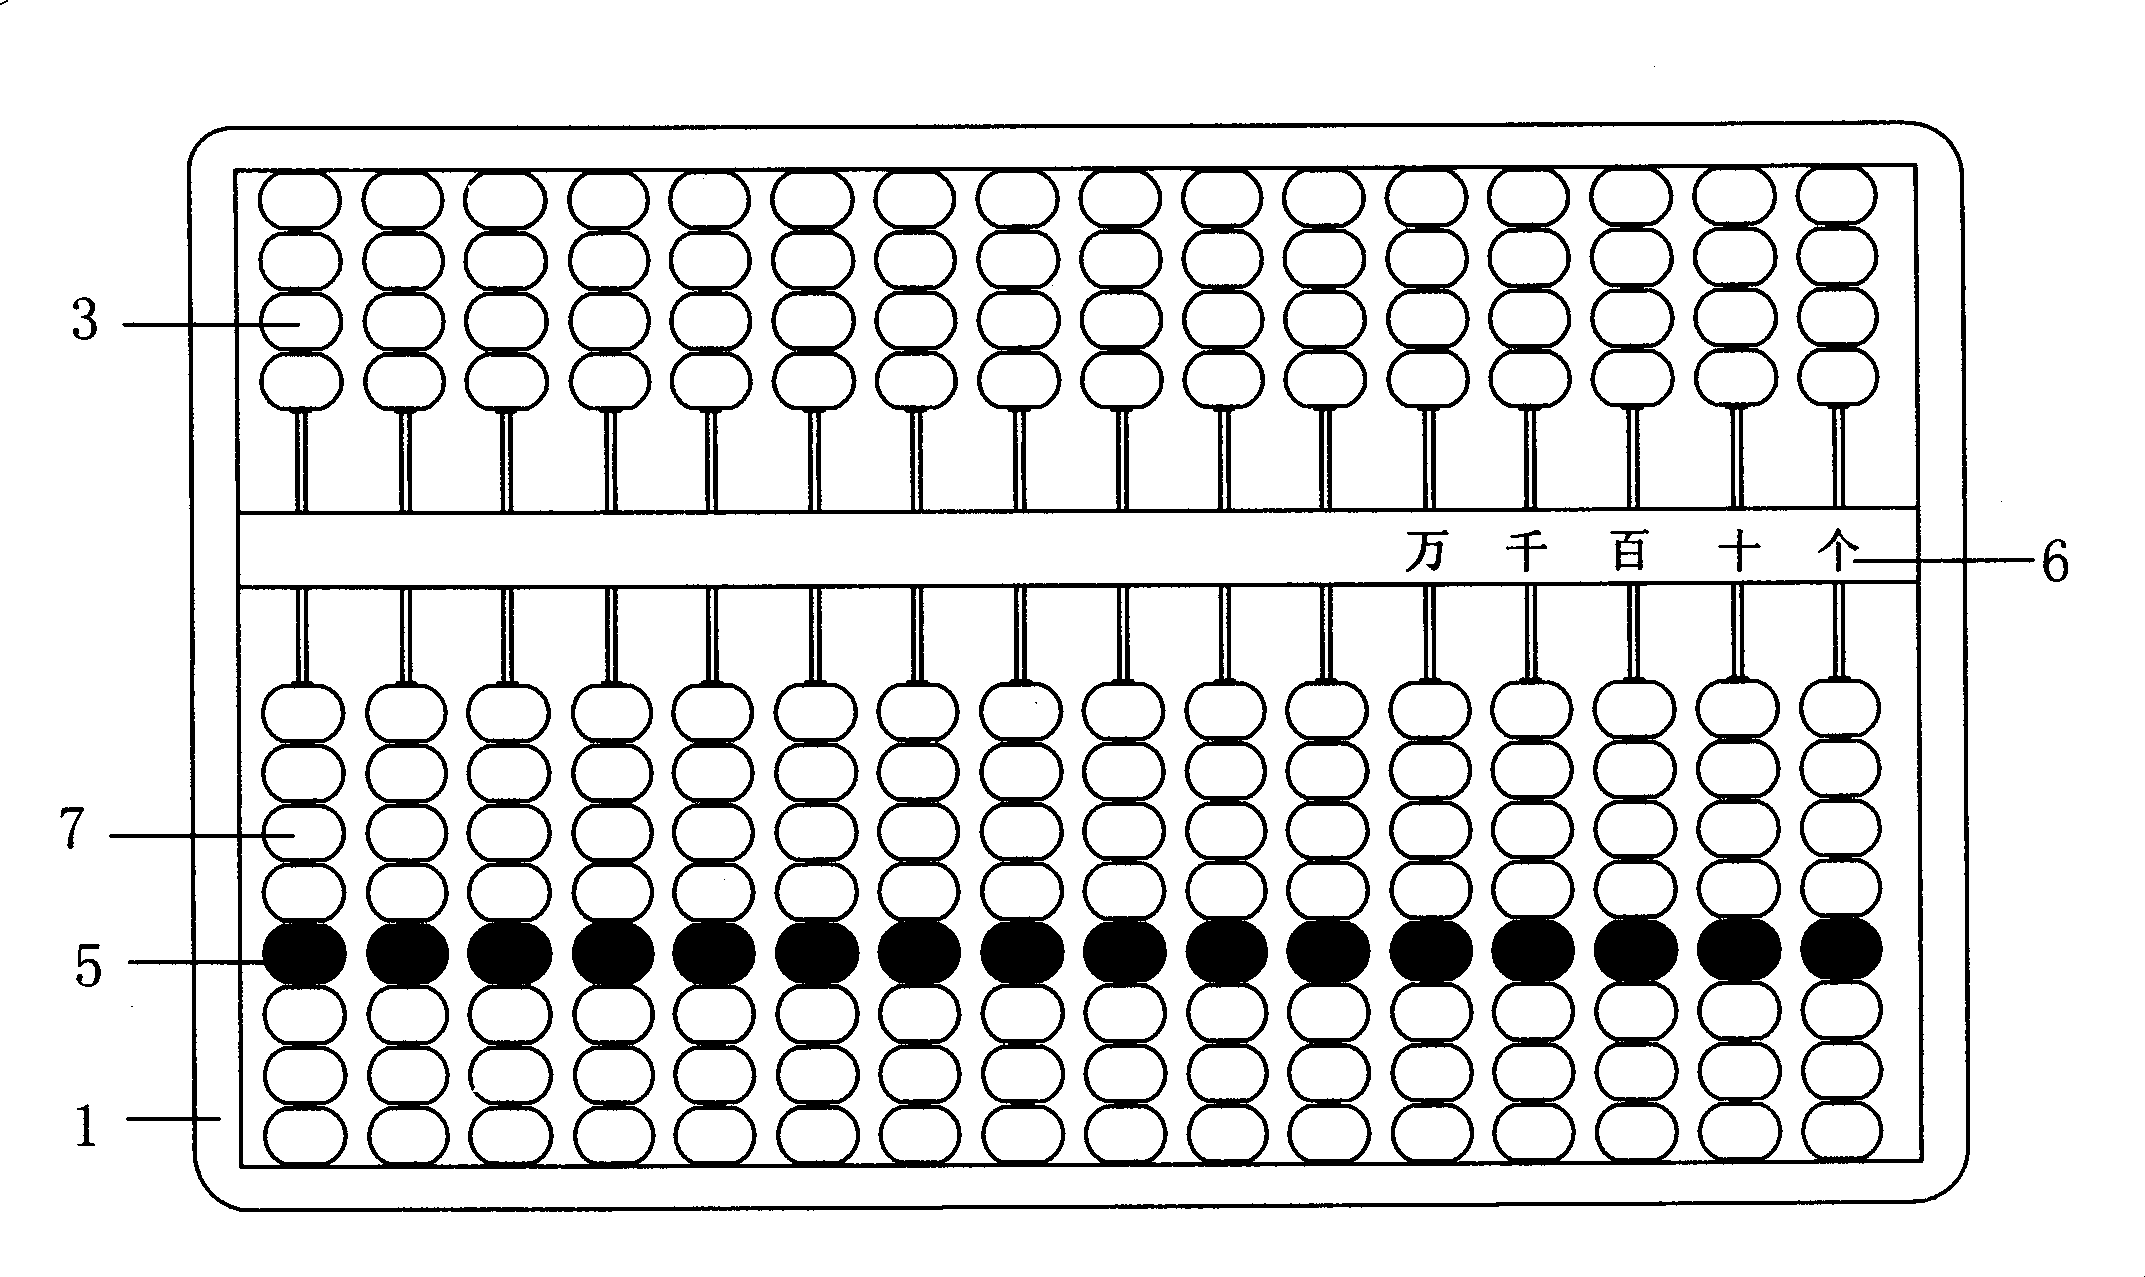 Lower eight type direct adding and subtracting abacus